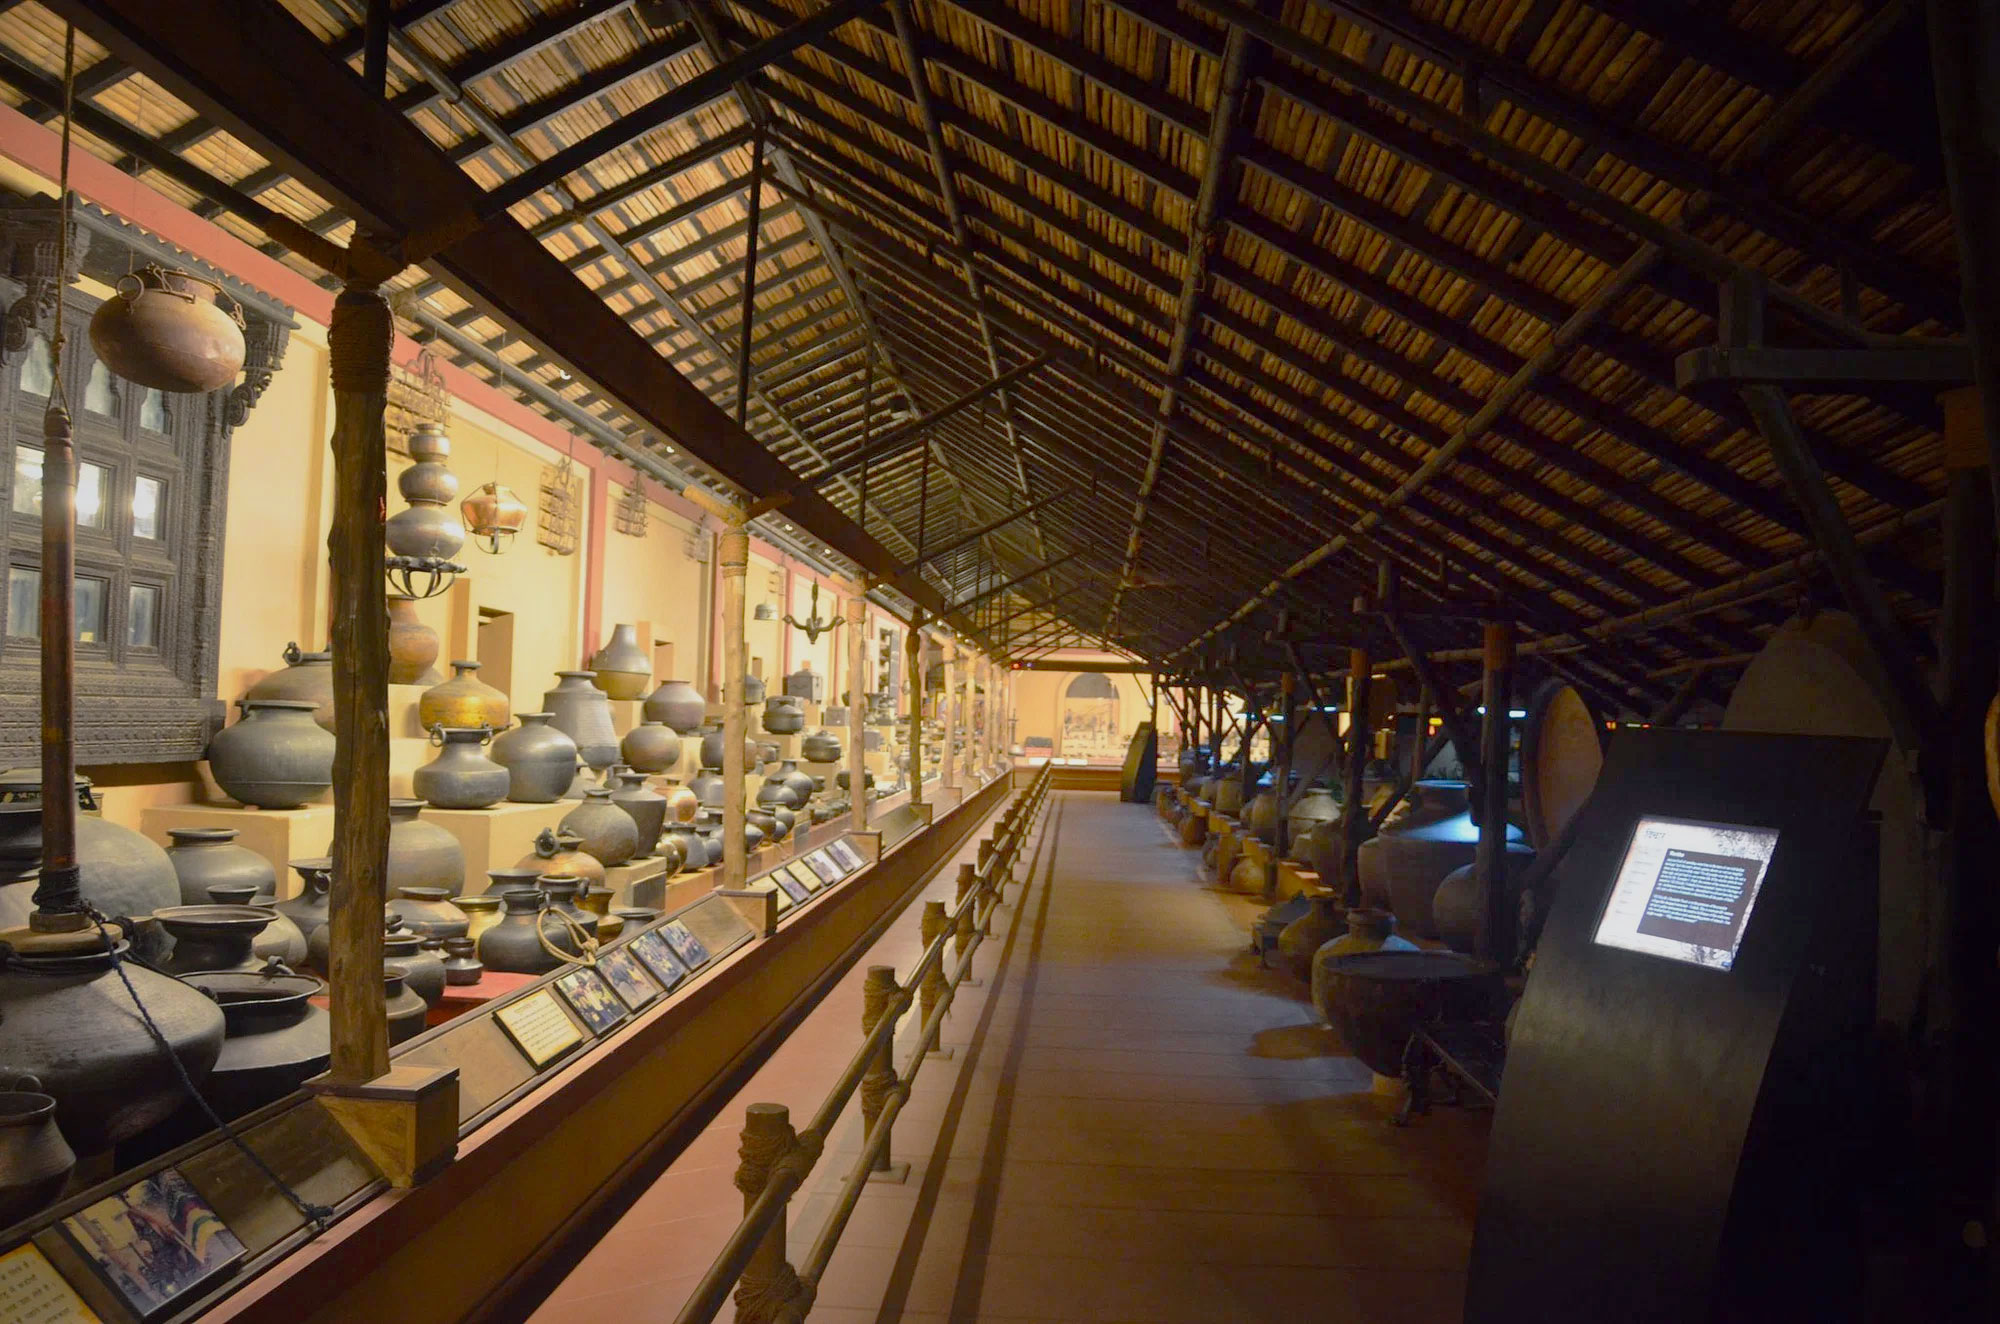 The priceless display of ancient utensils at the The Vechaar Cultural and Heritage Museum of Utensils in Ahmedabad Gujarat